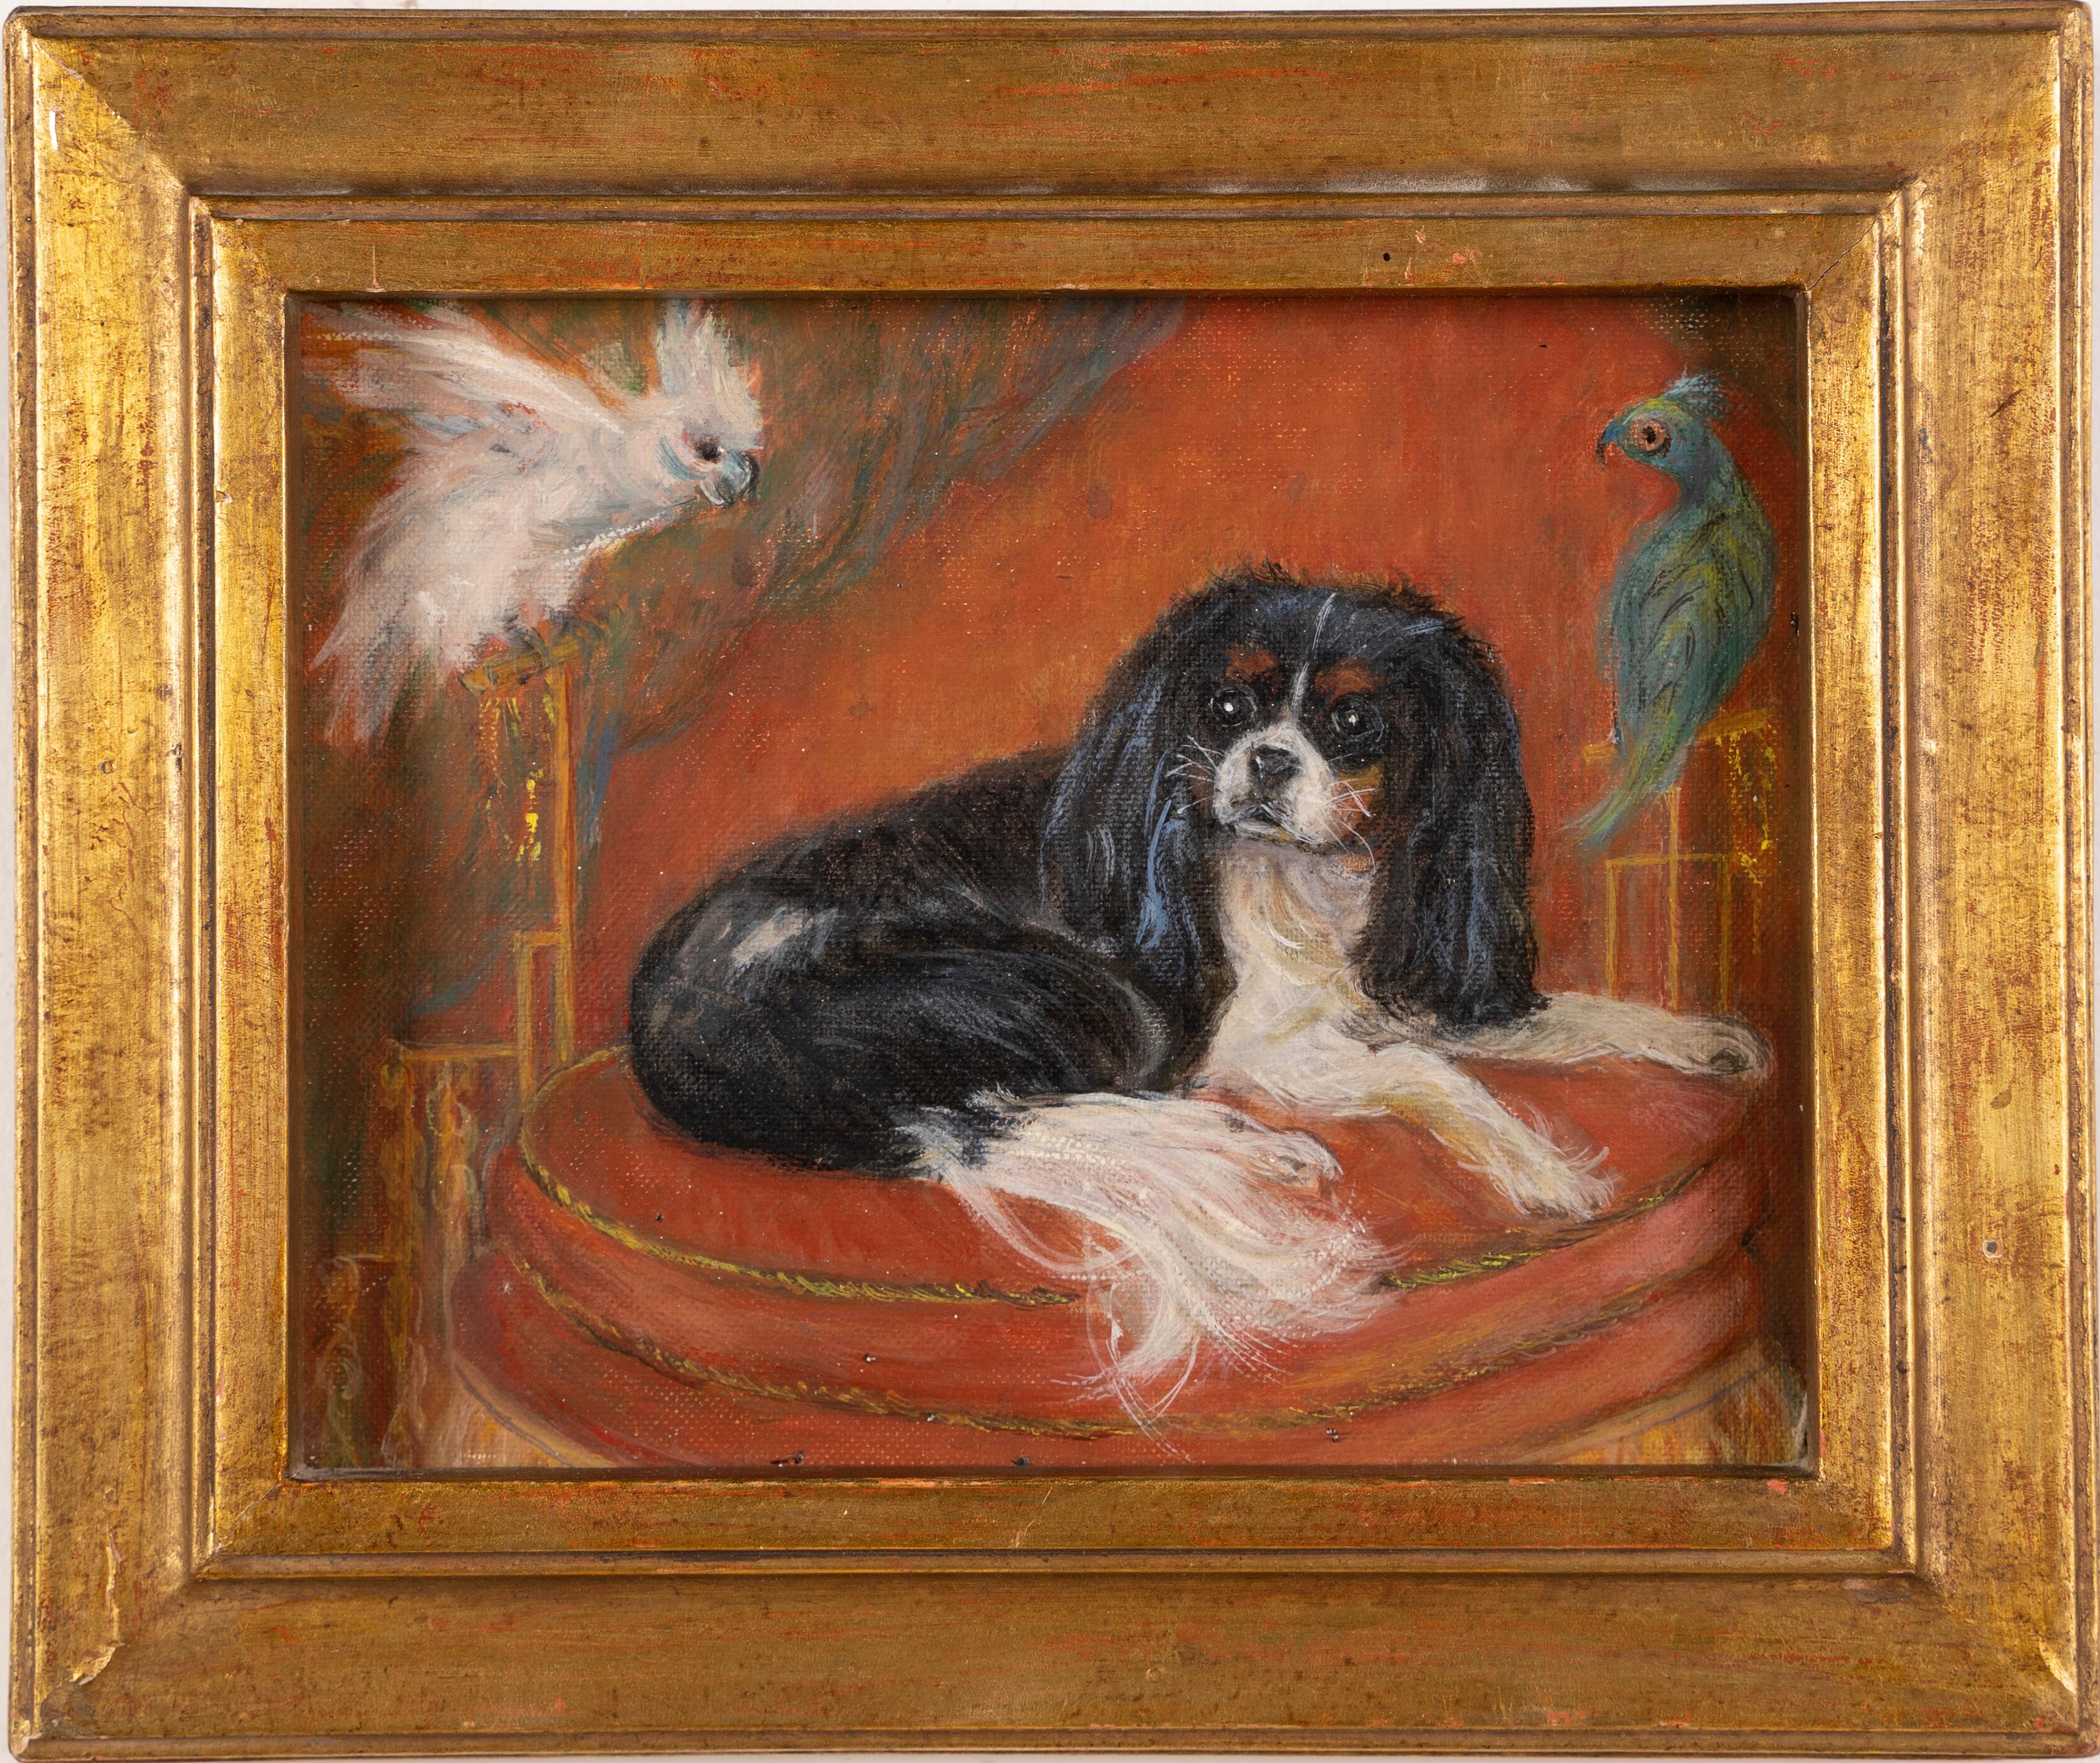 Unknown Interior Painting - Antique American Impressionist King Charles Cavalier Spaniel Dog Parrot Painting